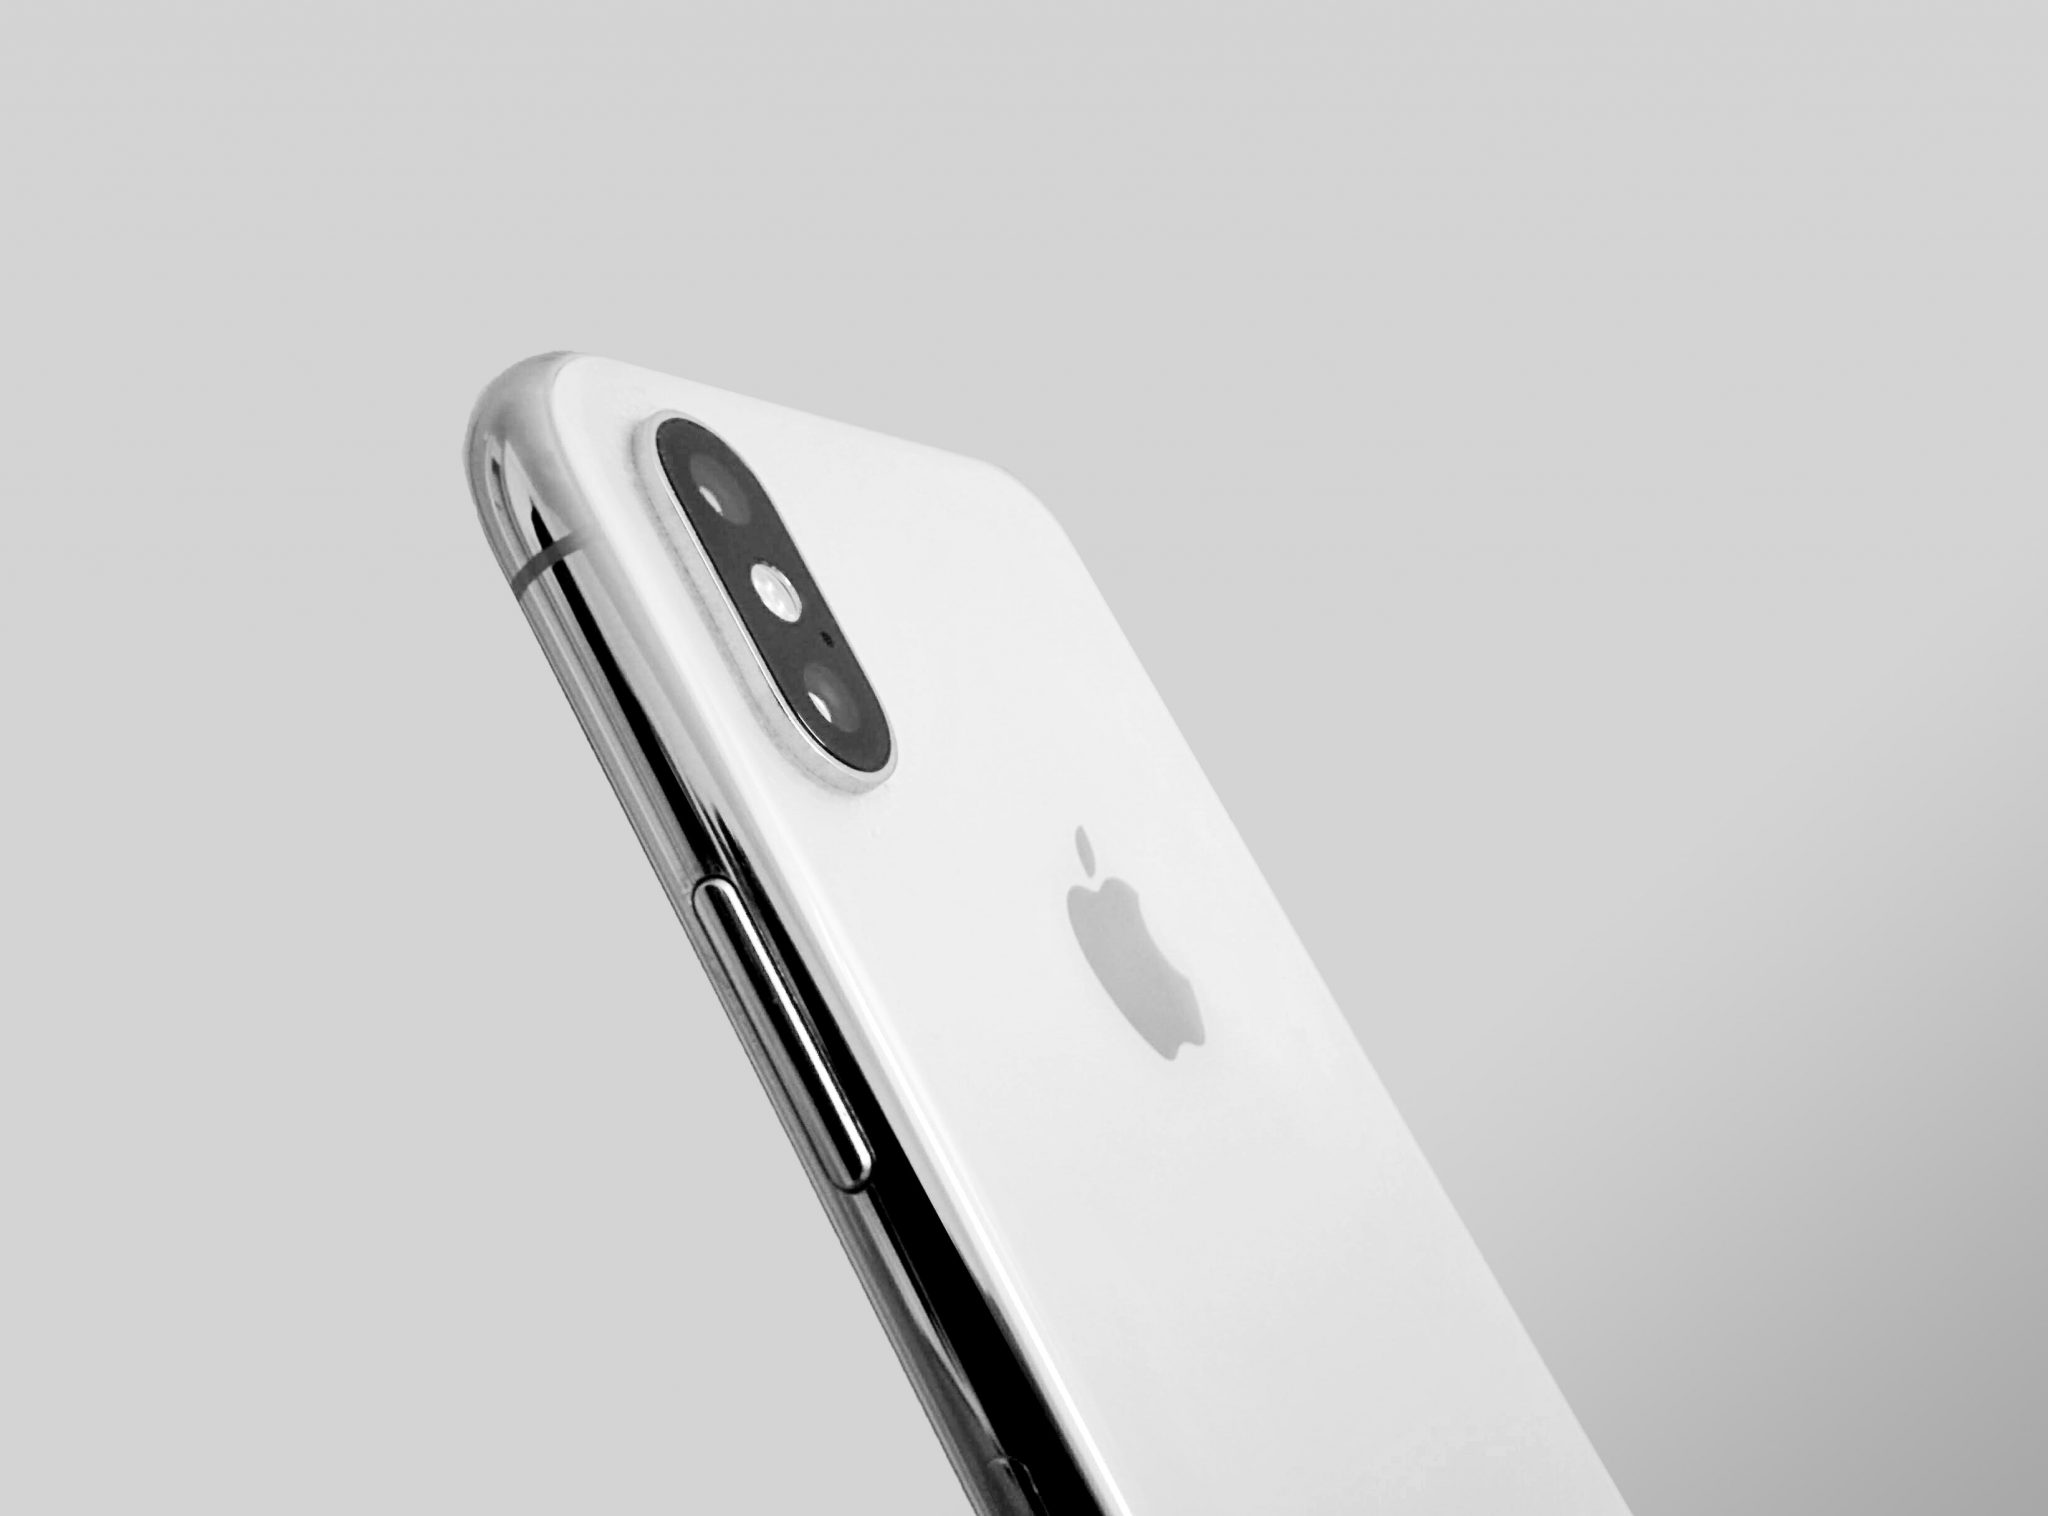 White iPhone X side on empty background